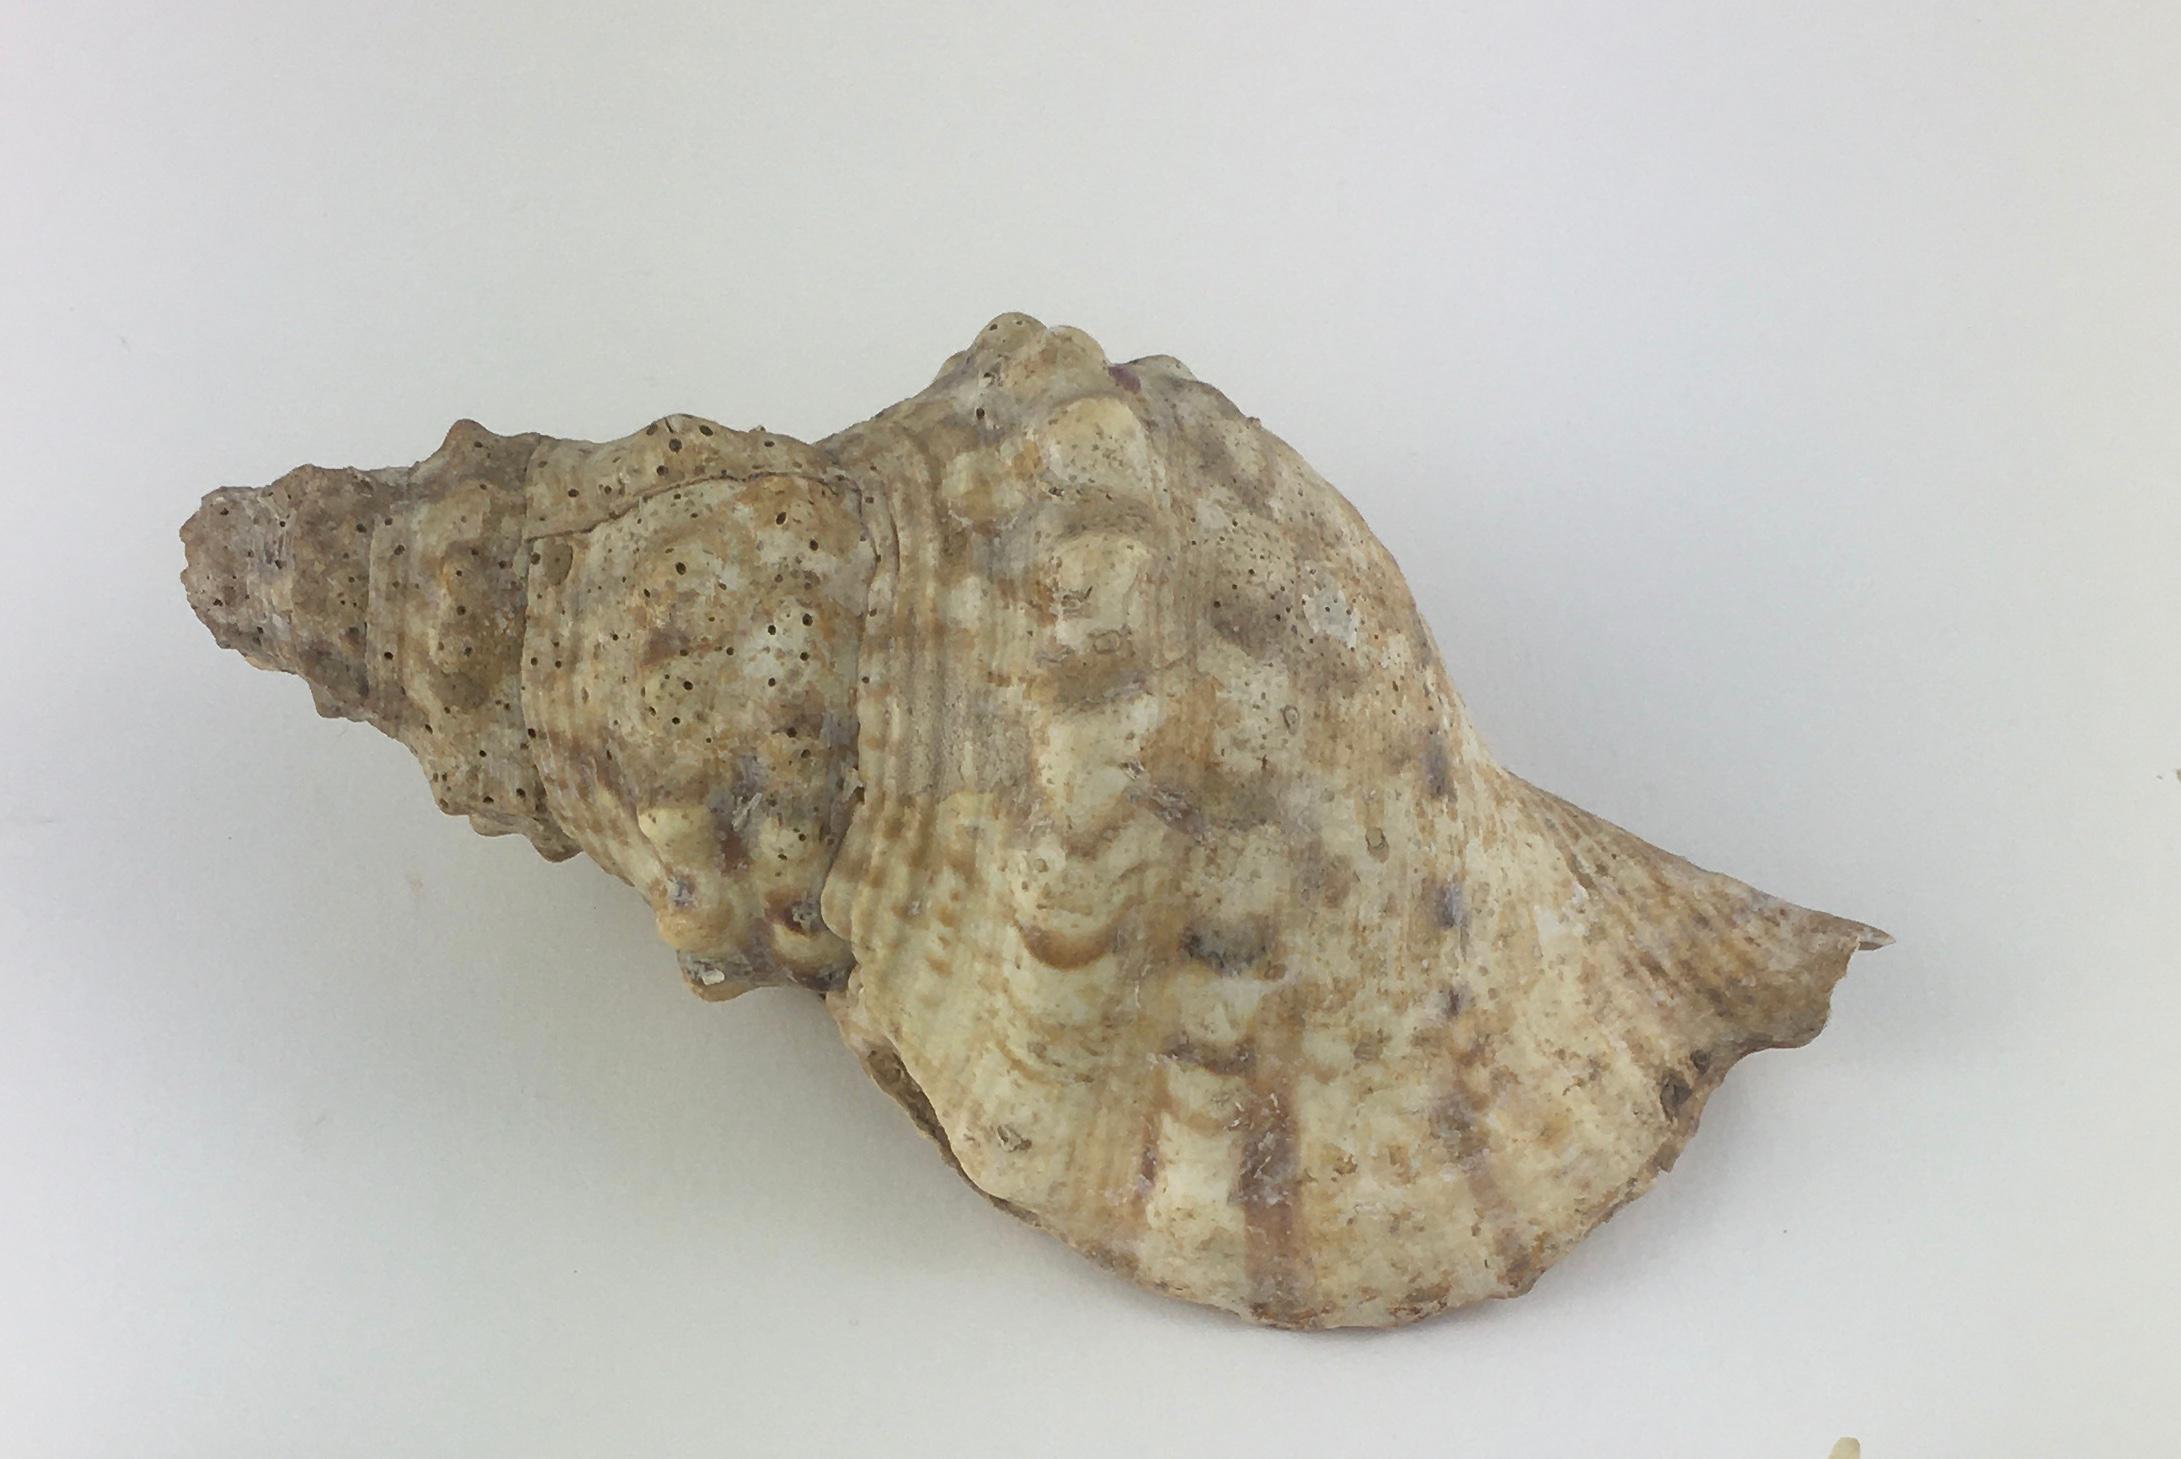 A beautiful natural specimen, Charonia is a genus of very large sea snail, commonly known as Triton's trumpet or Triton snail. They are marine gastropod mollusks in the monotypic family Charoniidae.
This species has a wide distribution, it has been